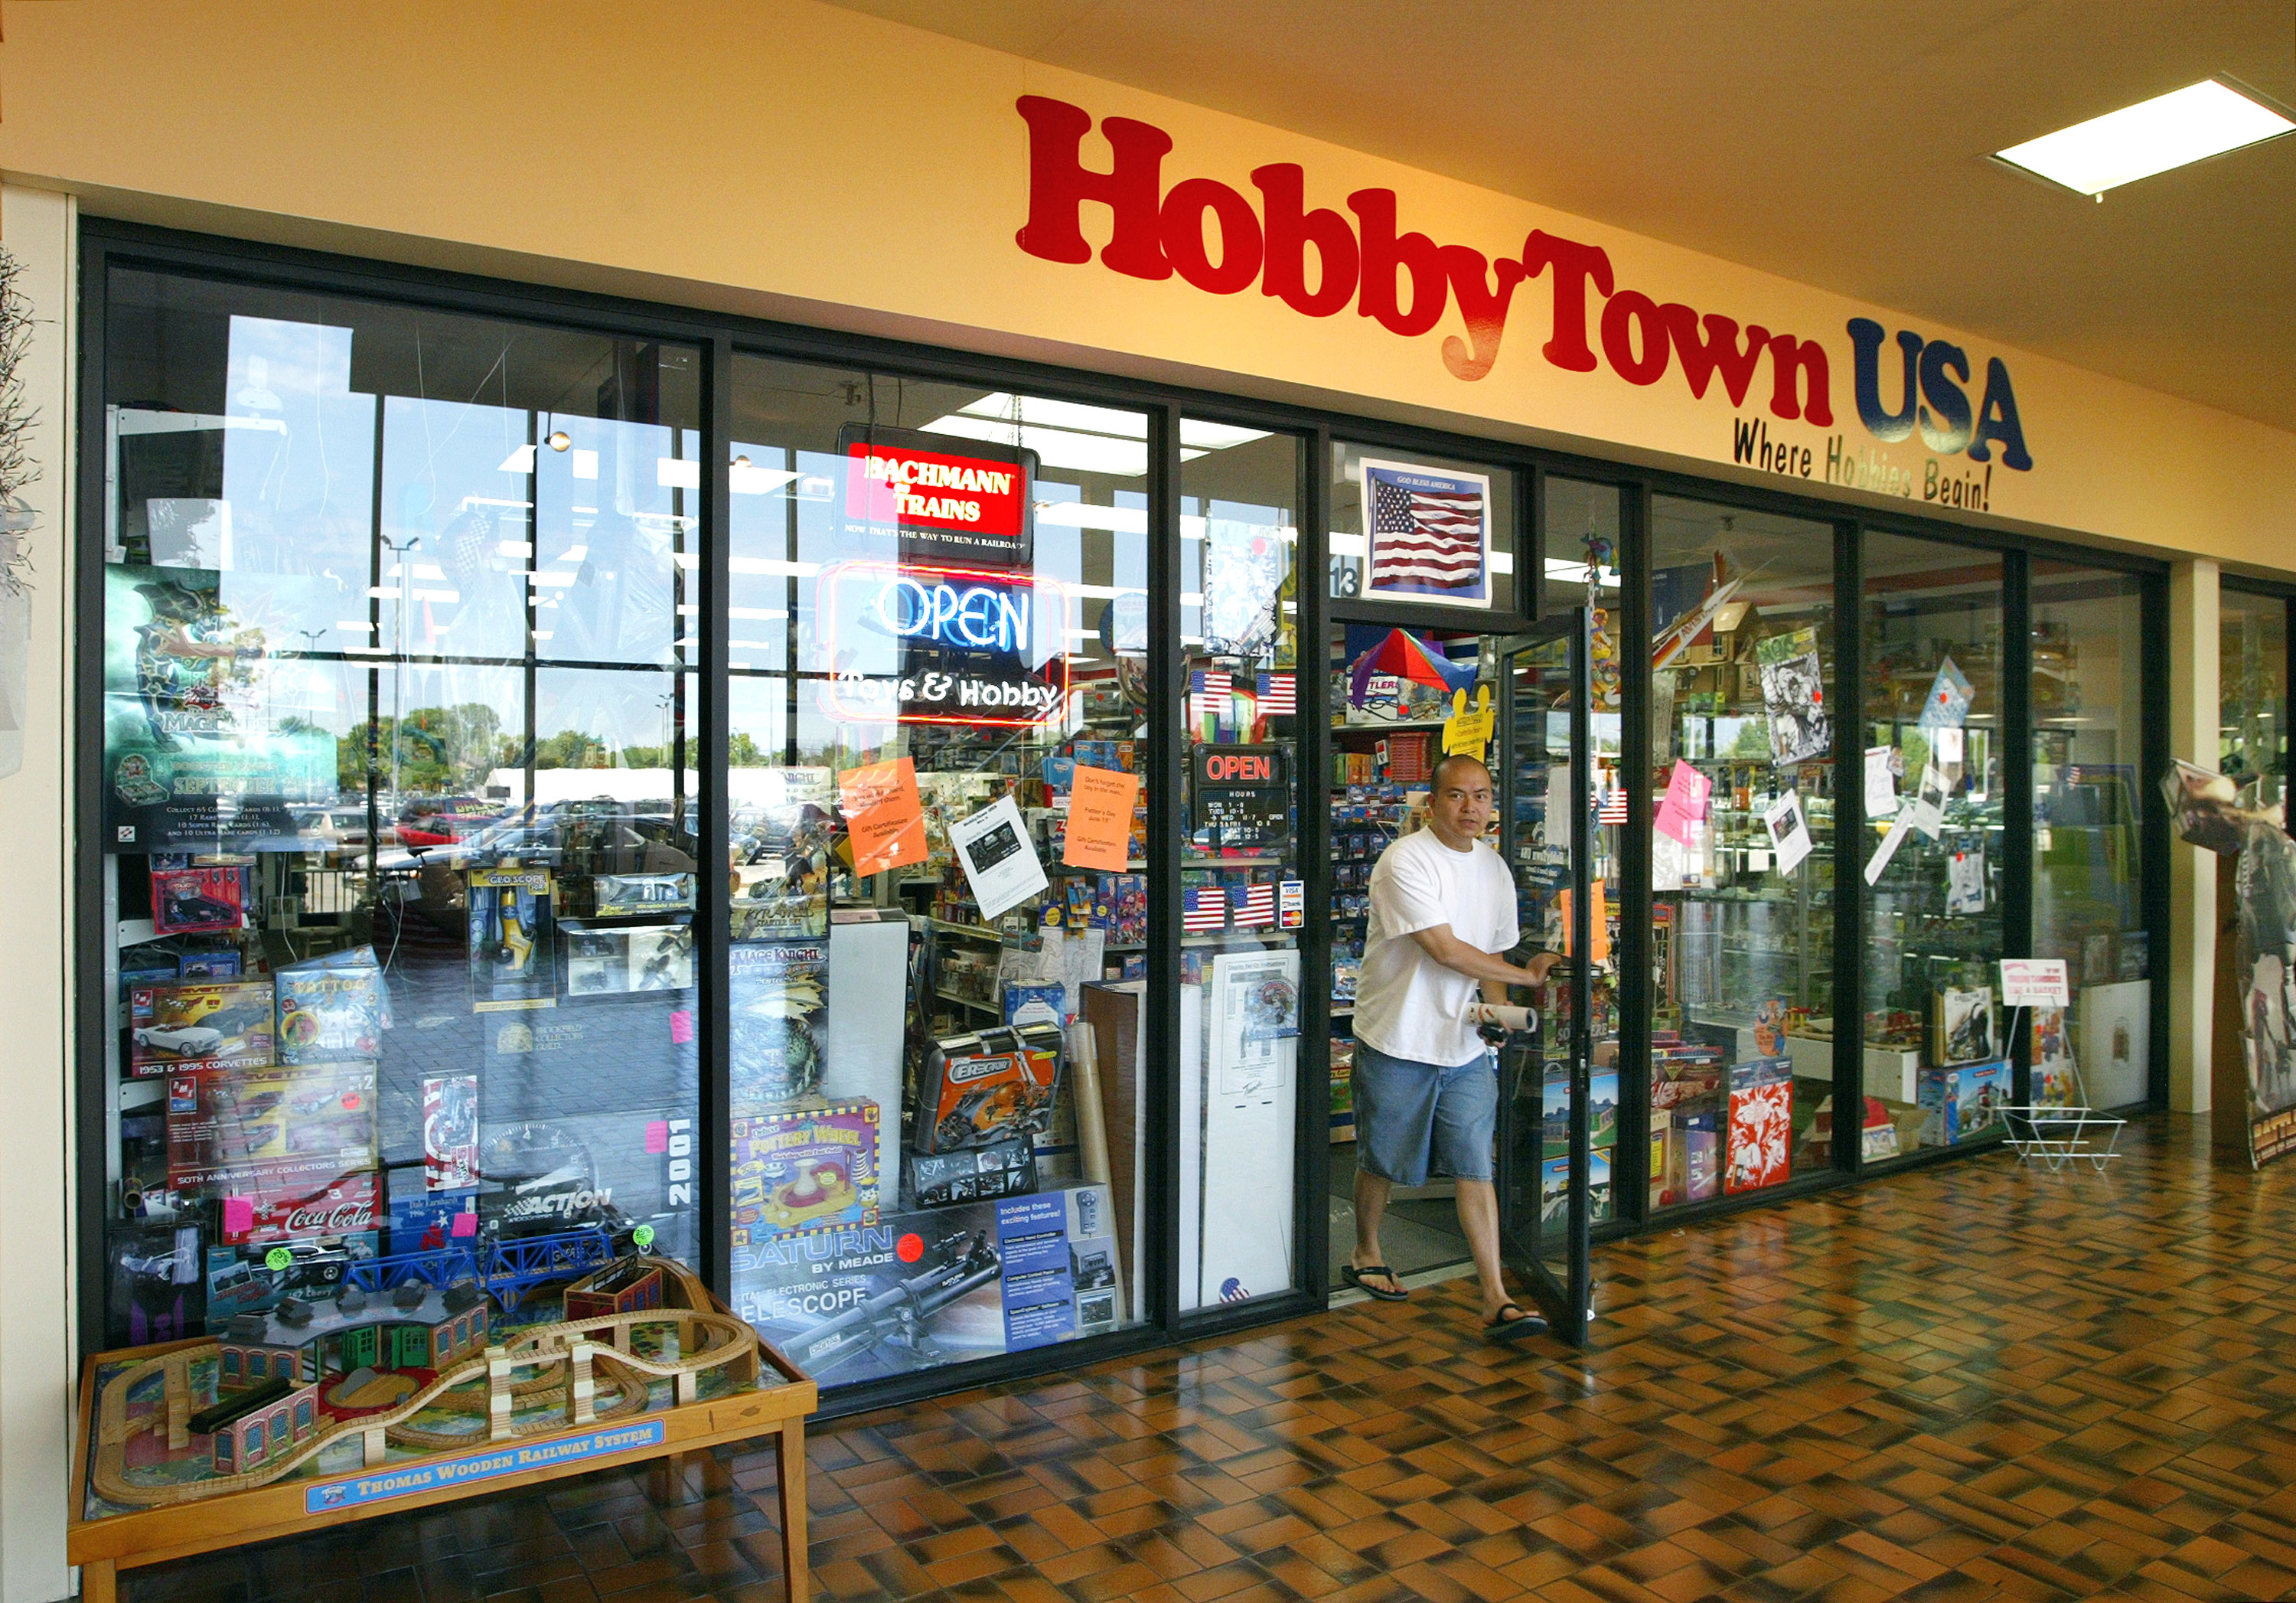 A man exits a HobbyTown USA store while holding a bag. The storefront features various hobby-related items on display and several signs